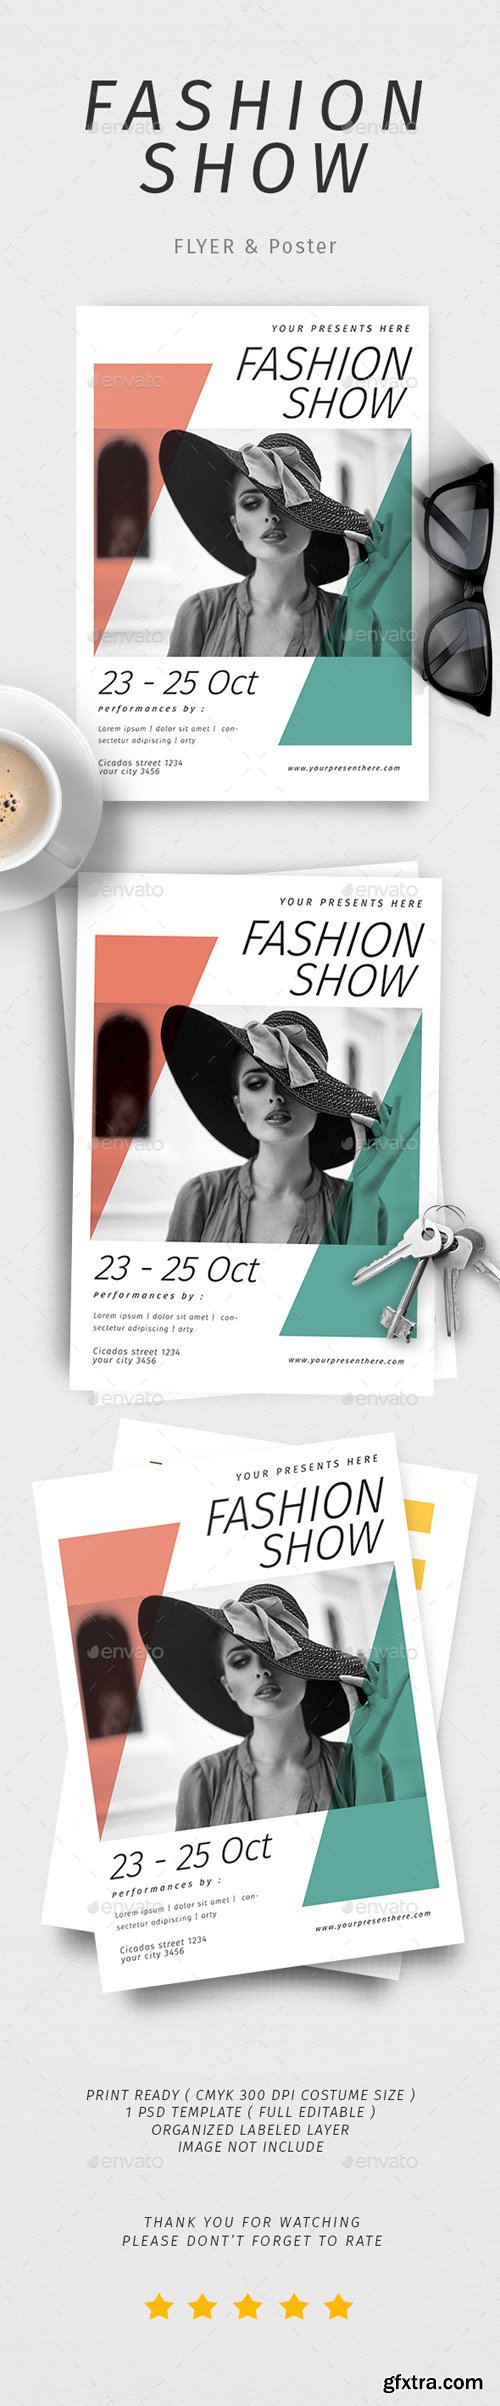 GR - Fashion Show Poster & Flyer 20602753